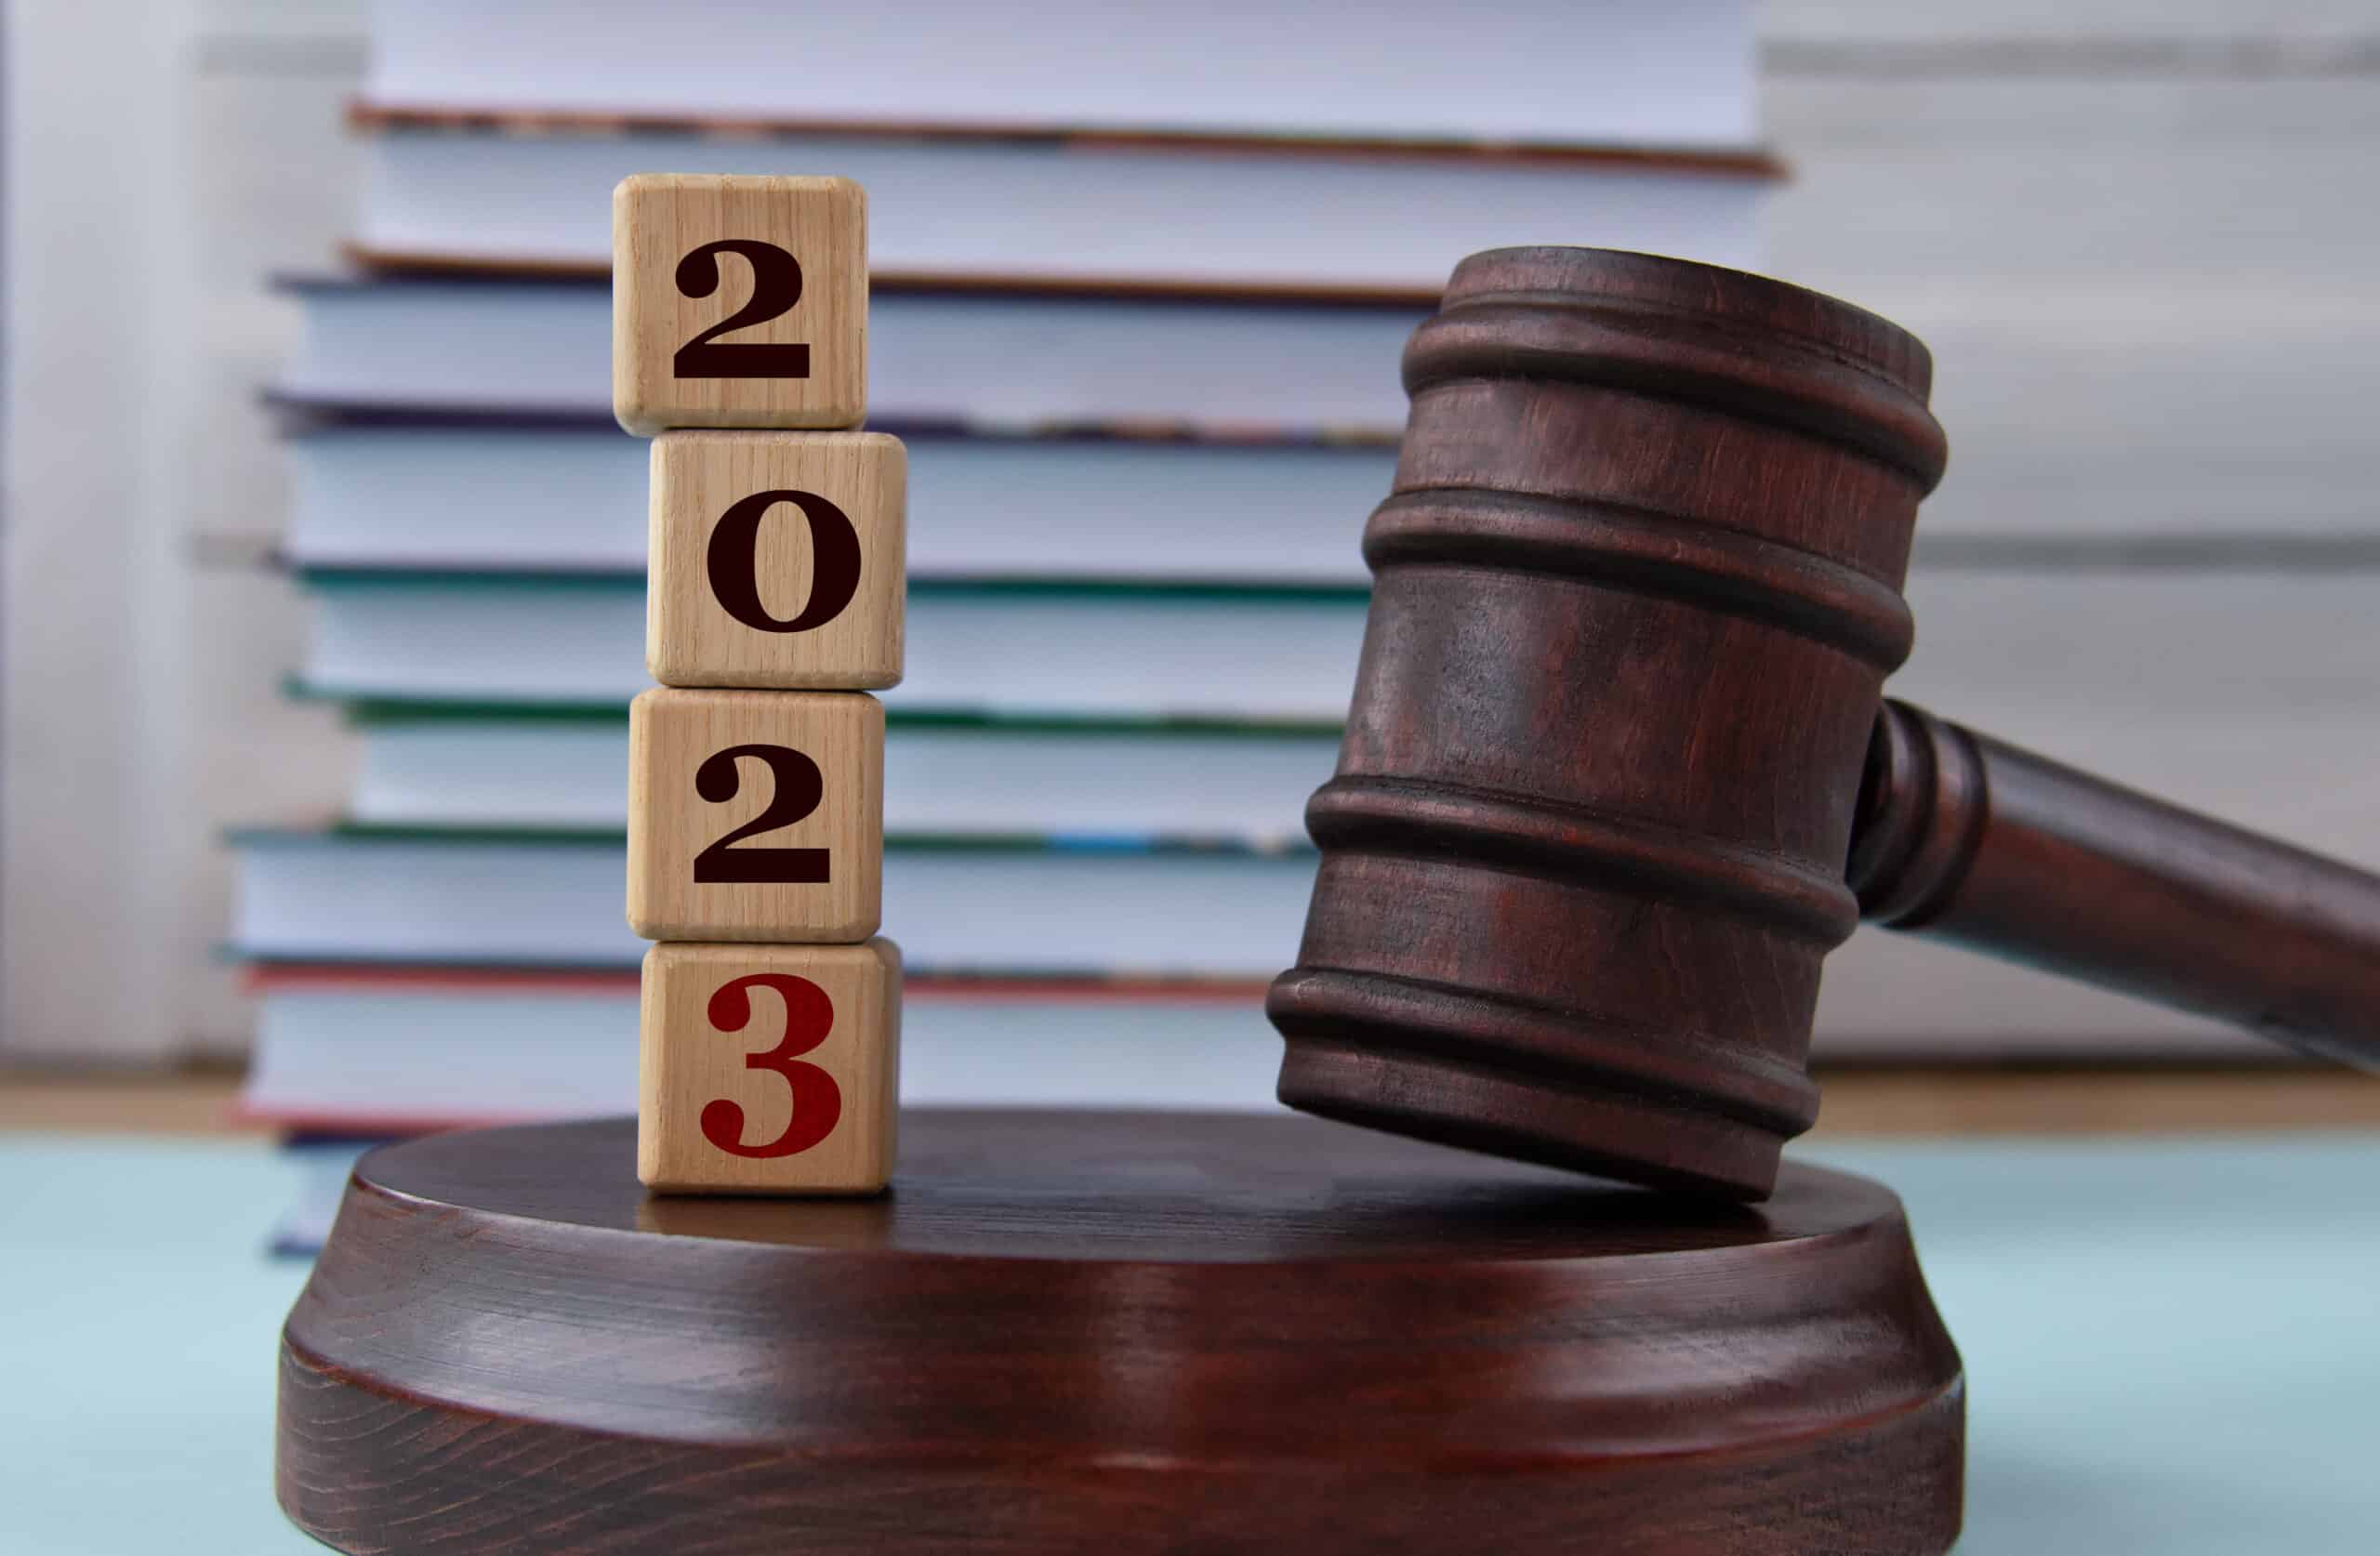 figures of the year 2023 on wooden cubes against the background of the judge's hammer and stand